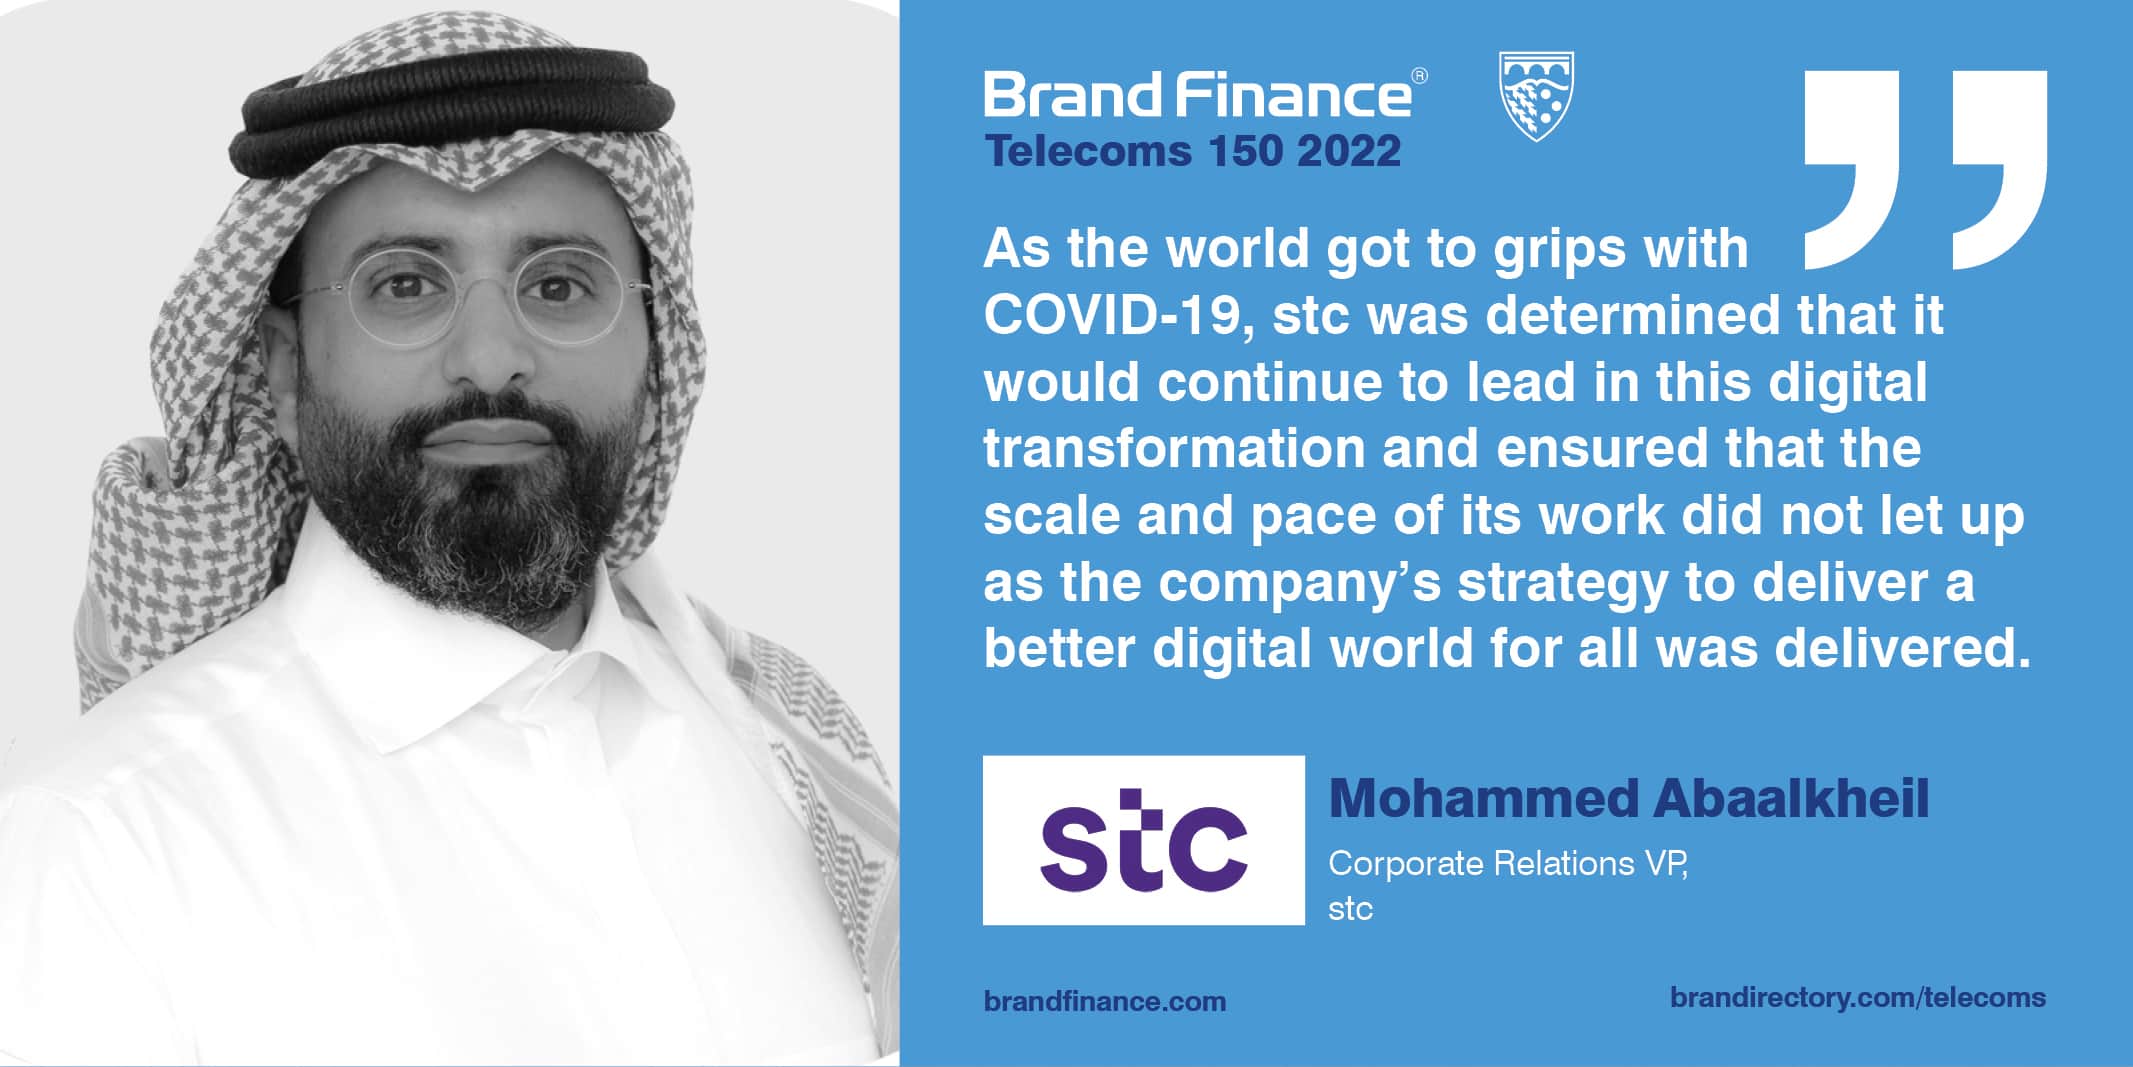 Mohammed Abaalkheil, Corporate Relations VP, stc